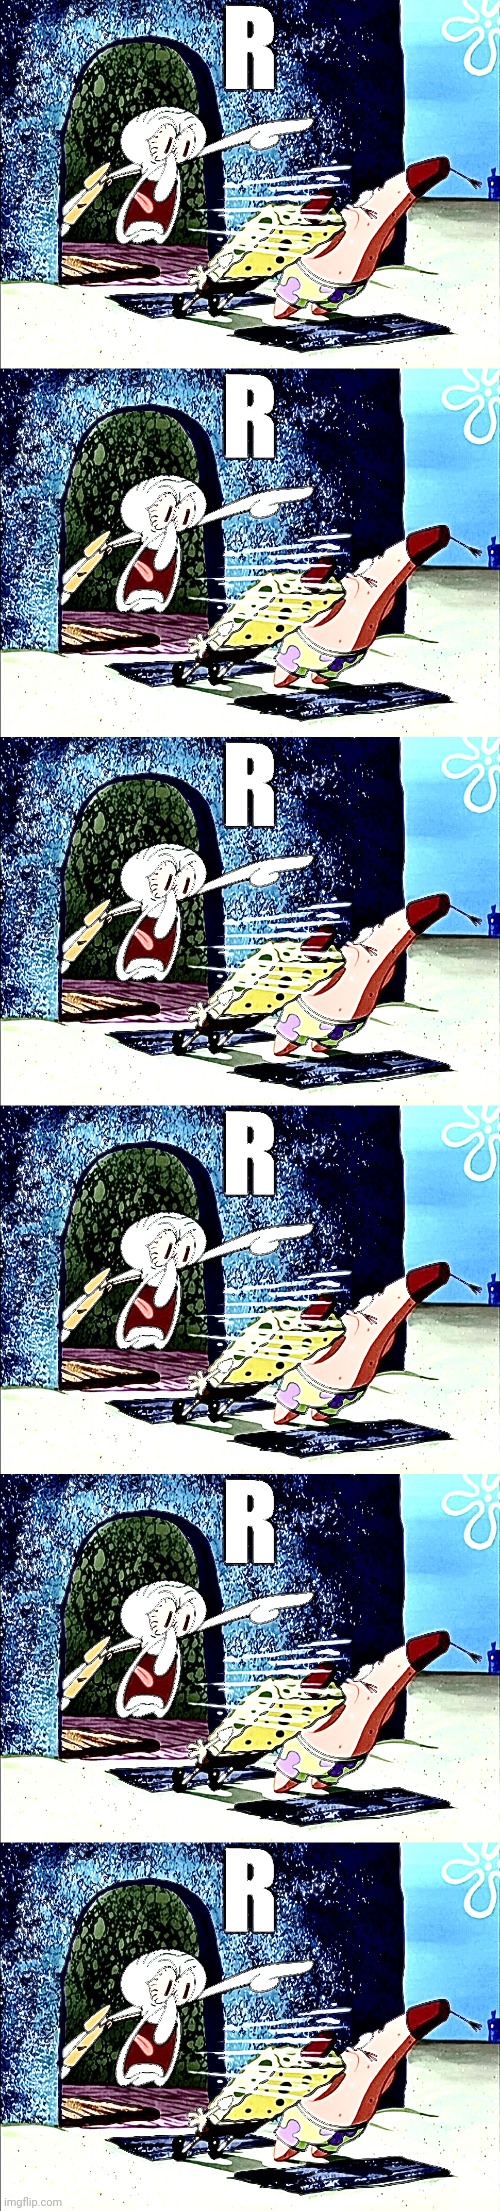 image tagged in squidward yells r | made w/ Imgflip meme maker